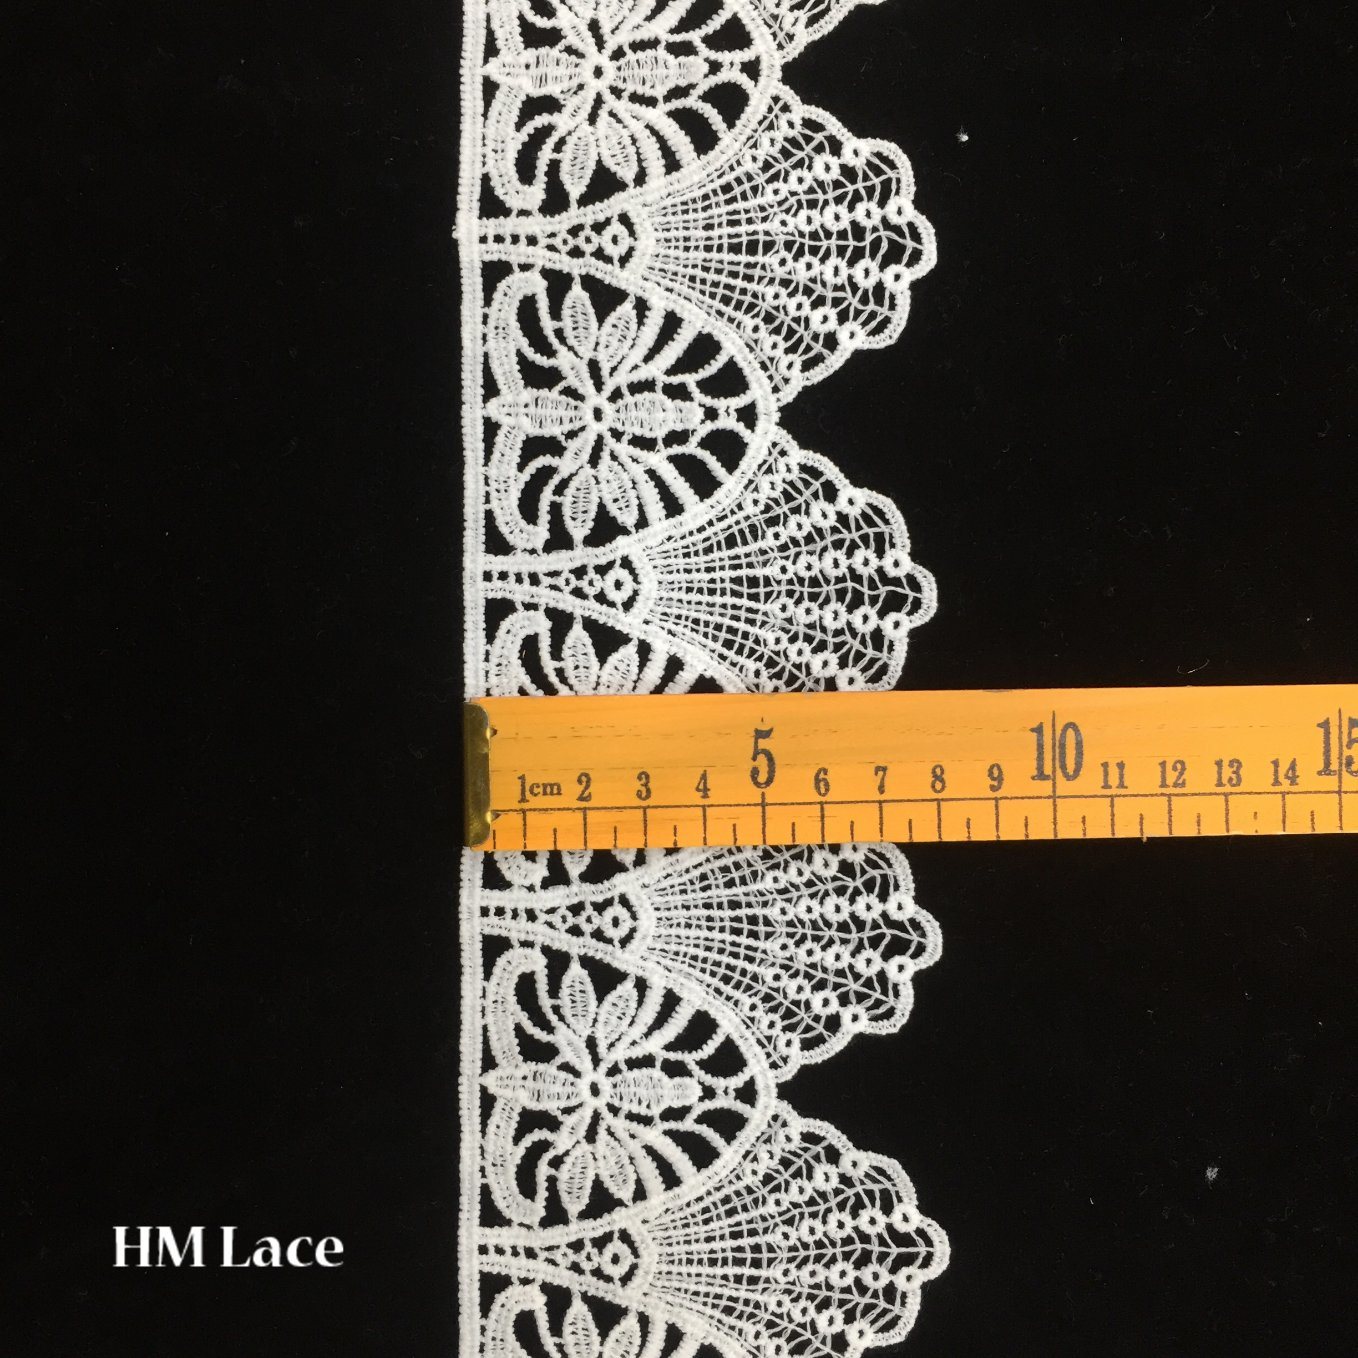 8cm White Floral Eyelet Embroidered Lace Trim Fabric for Garment Skirt Extender Wedding Home Decor DIY Craft Supply Hmhb1233